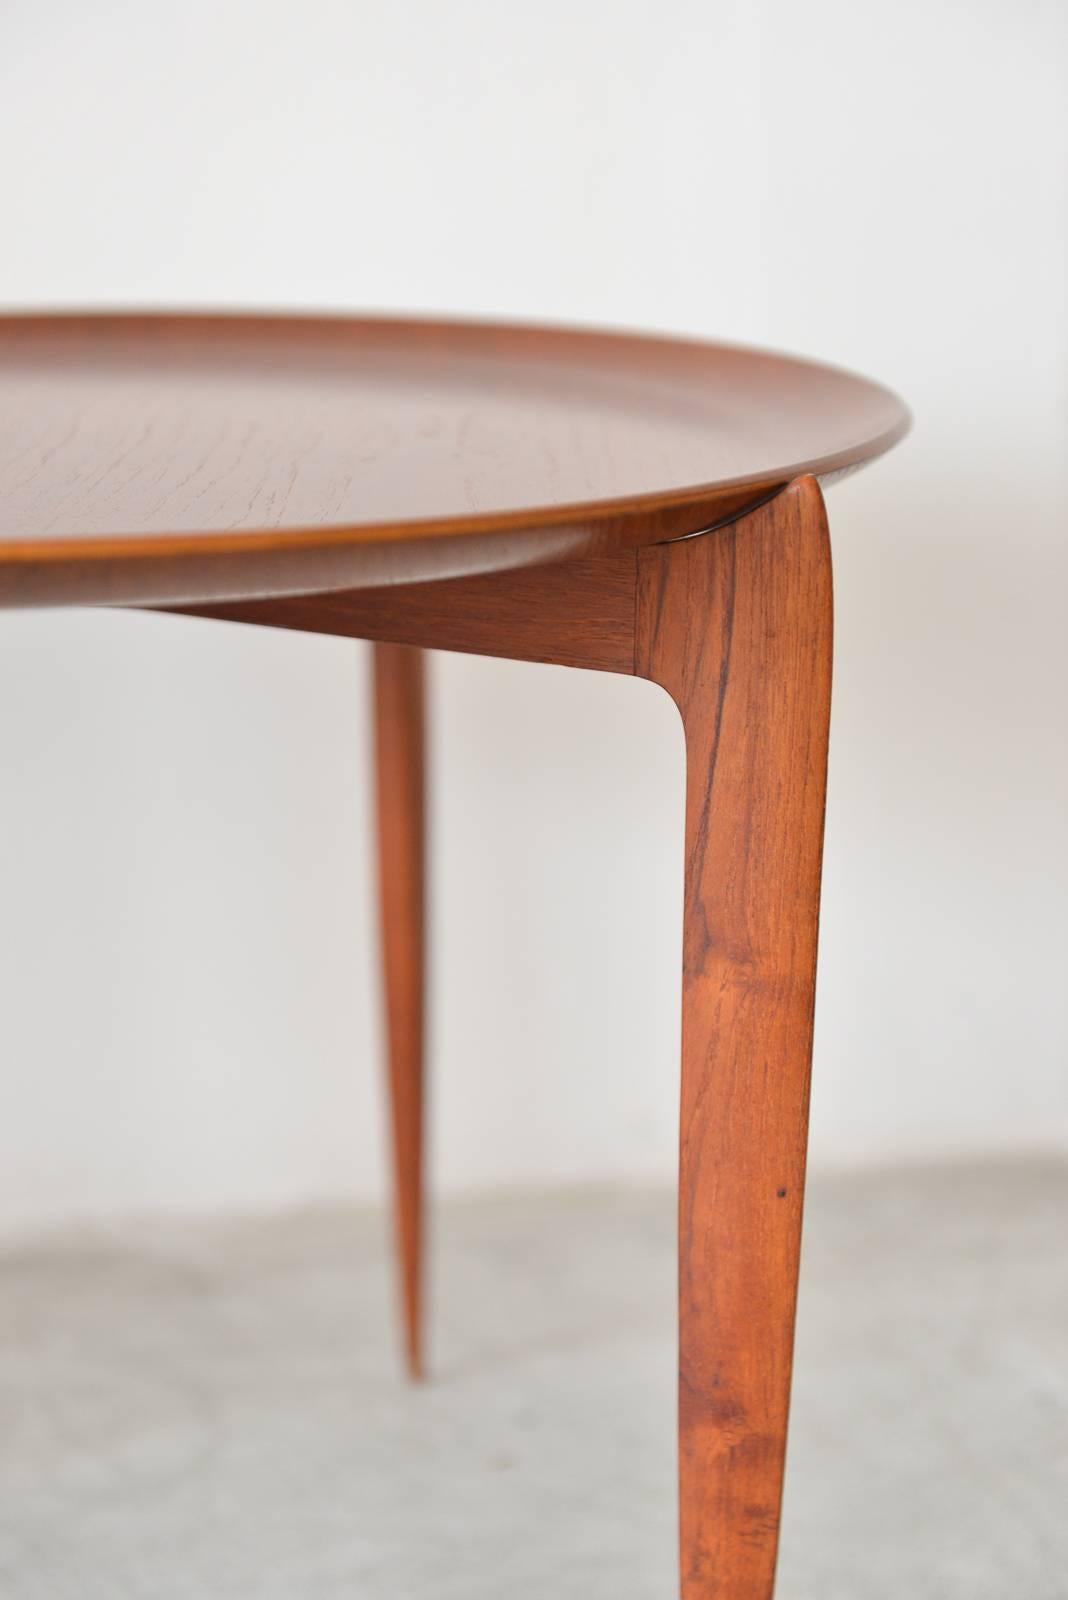 Scandinavian Modern Teak Tray Table by H Engholm and Svend Aage Willumsen